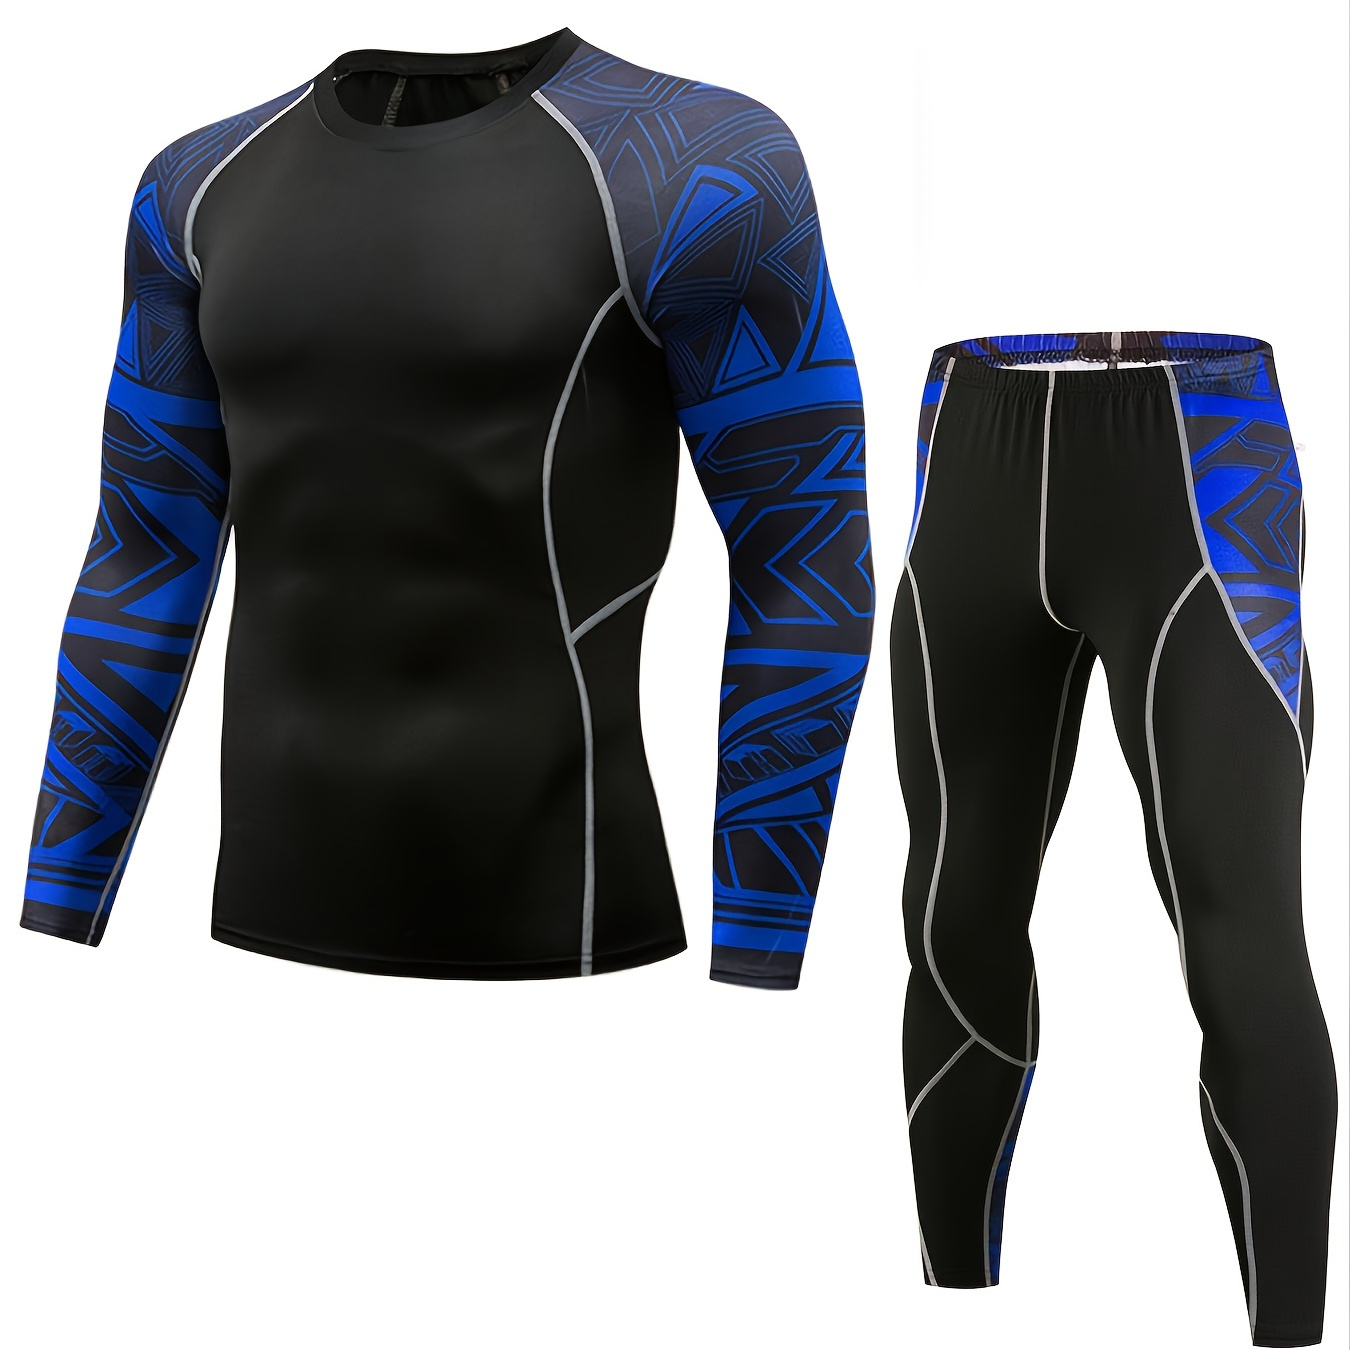 

Quick Dry Men's Sports Tights Set With Long Sleeve Fitness Shirt For Running, Basketball, Football & - Stay Cool & Comfortable All Day